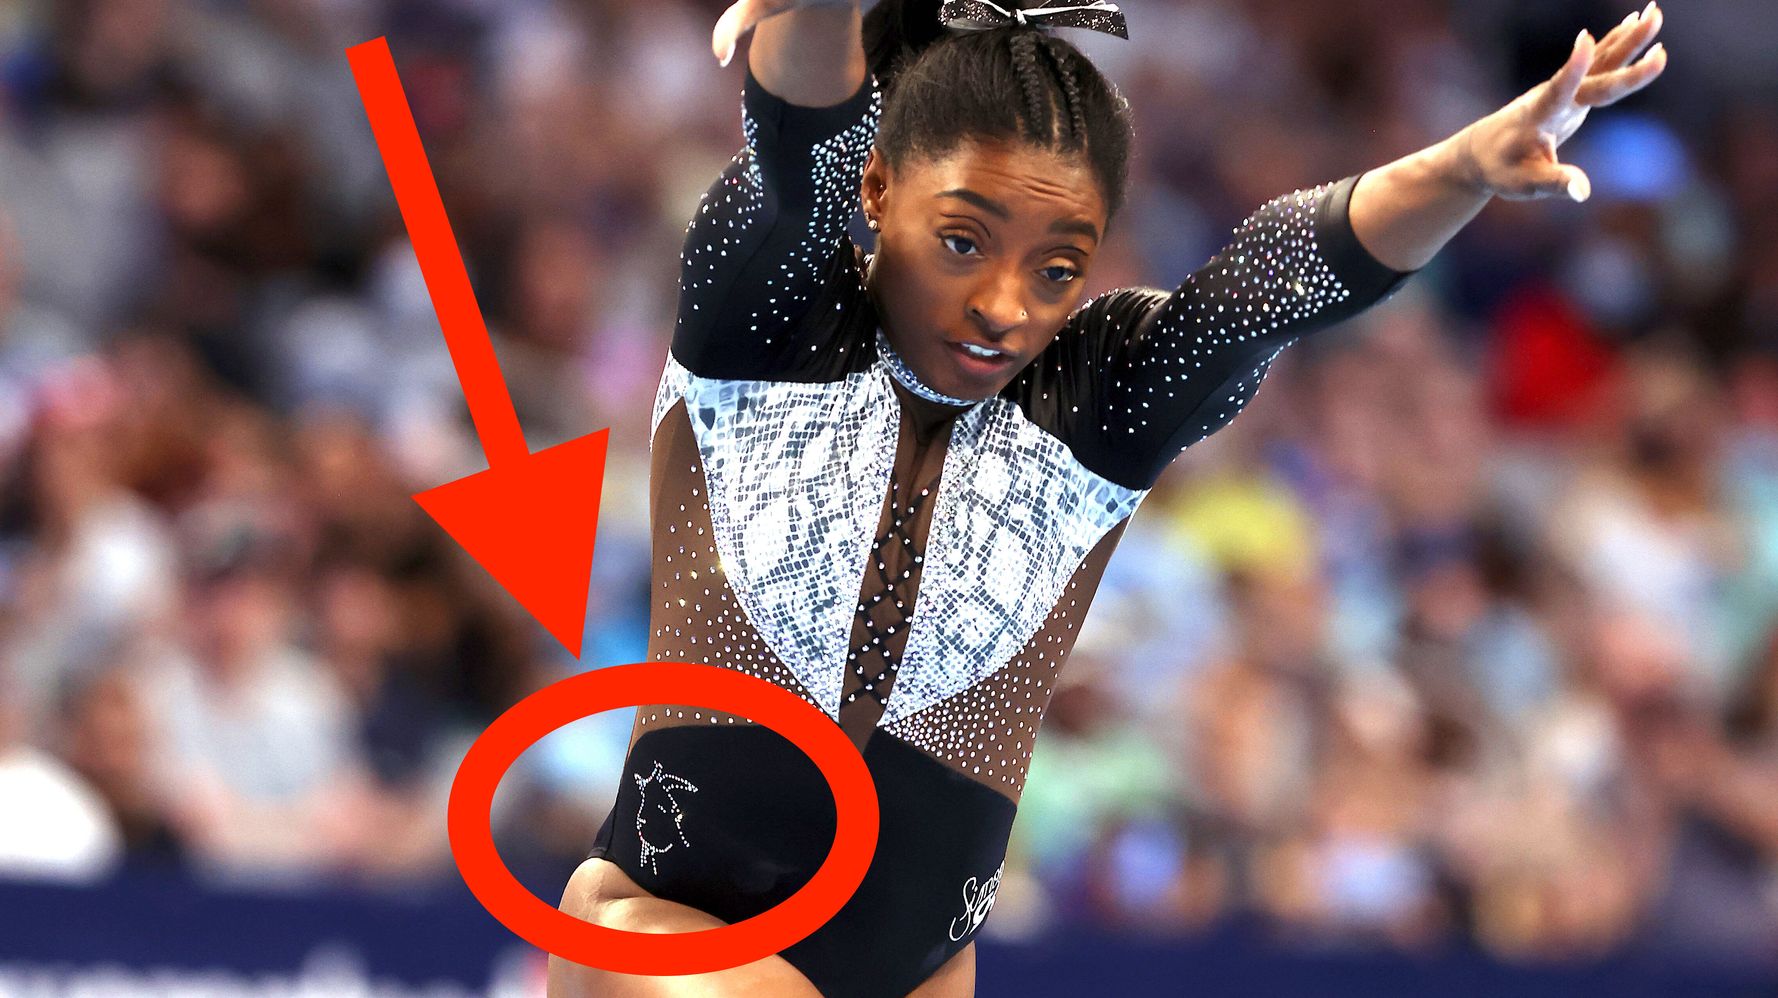 Simone Biles Reveals The Uplifting Reason For The Goat On Her Leotard